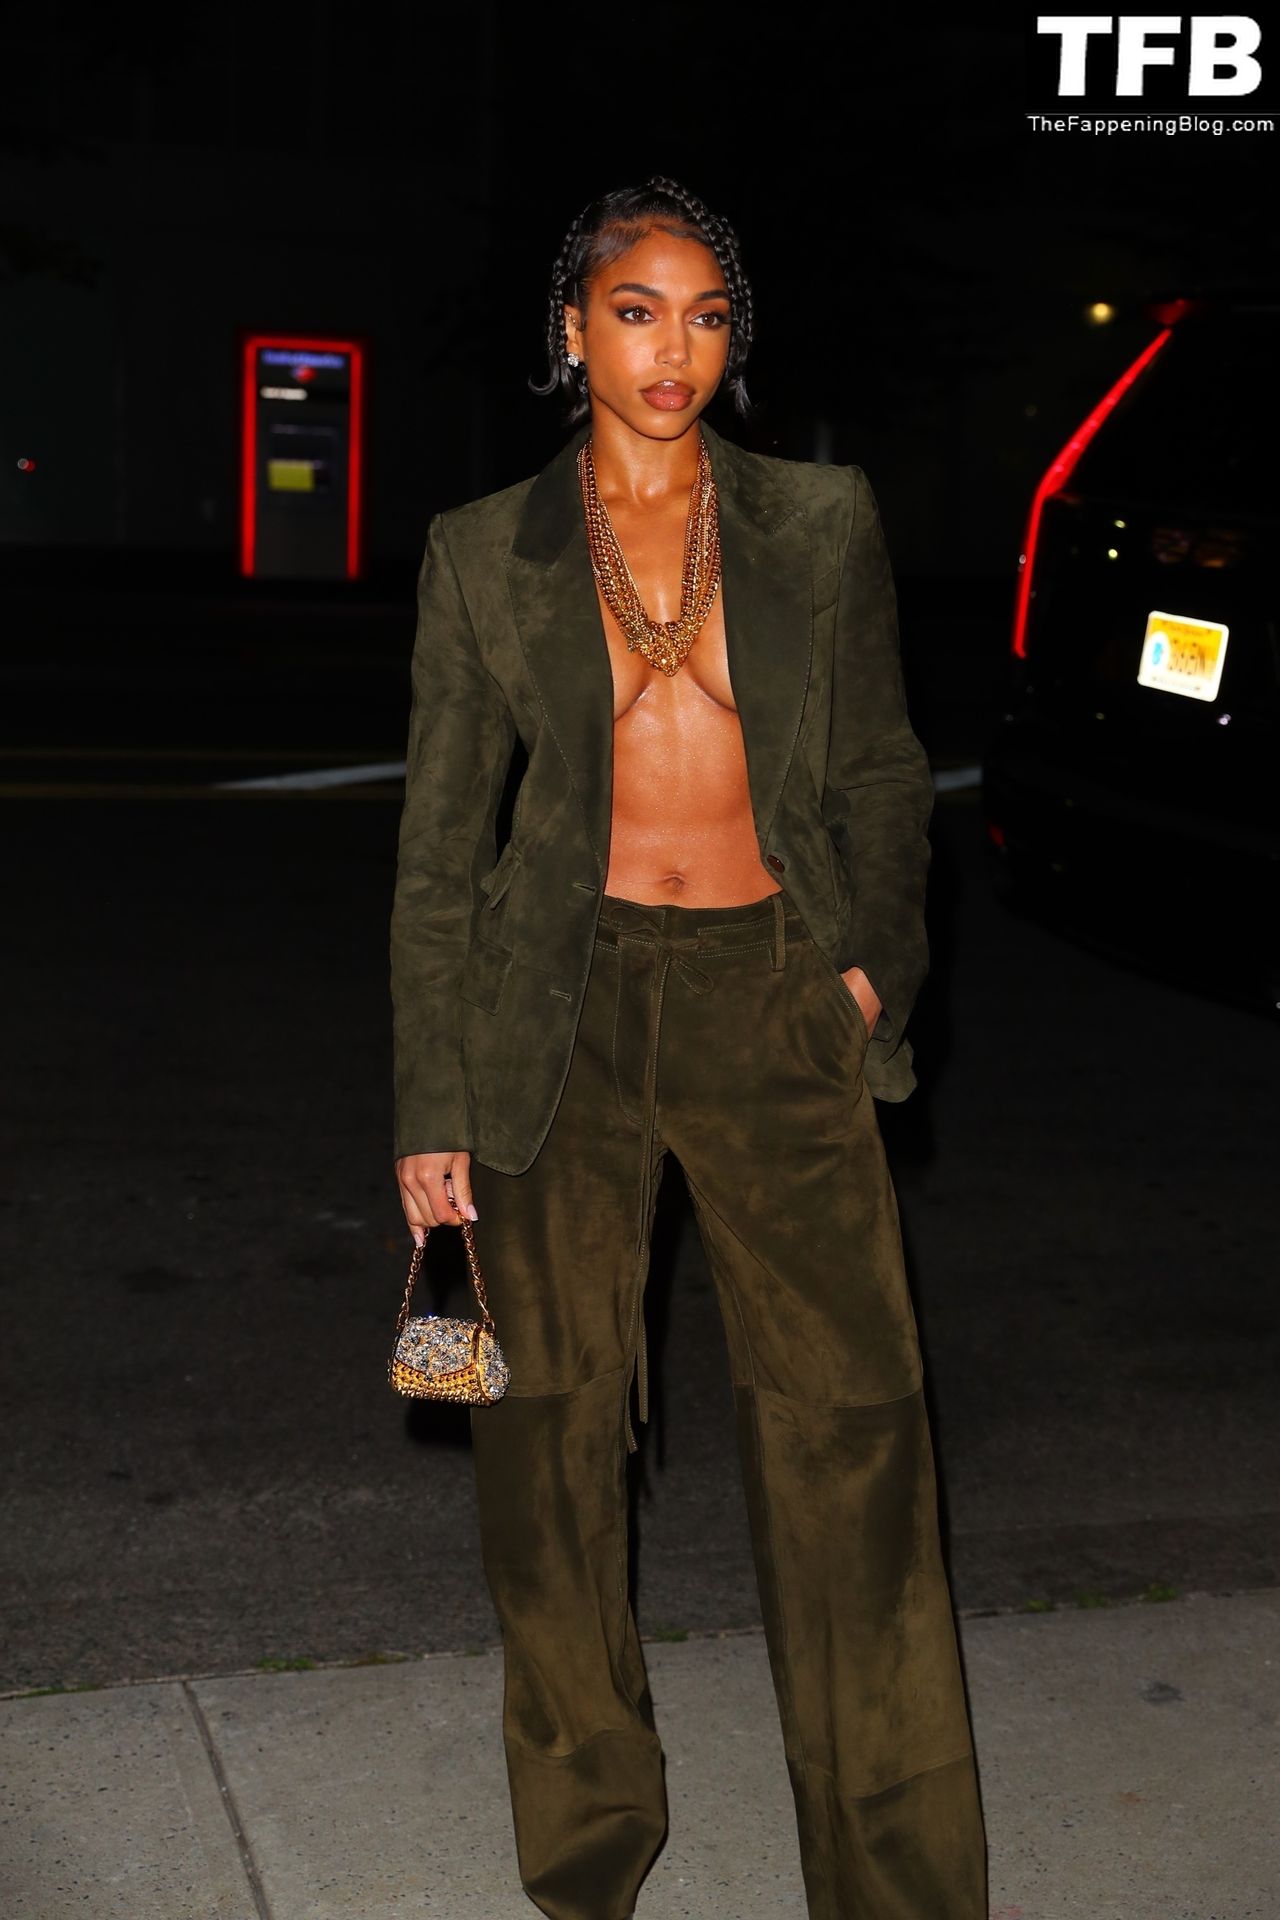 Lori Harvey Sexy The Fappening Blog 24 - Lori Harvey Shows Off Her Tits at the Tom Ford Fashion Show (38 Photos)